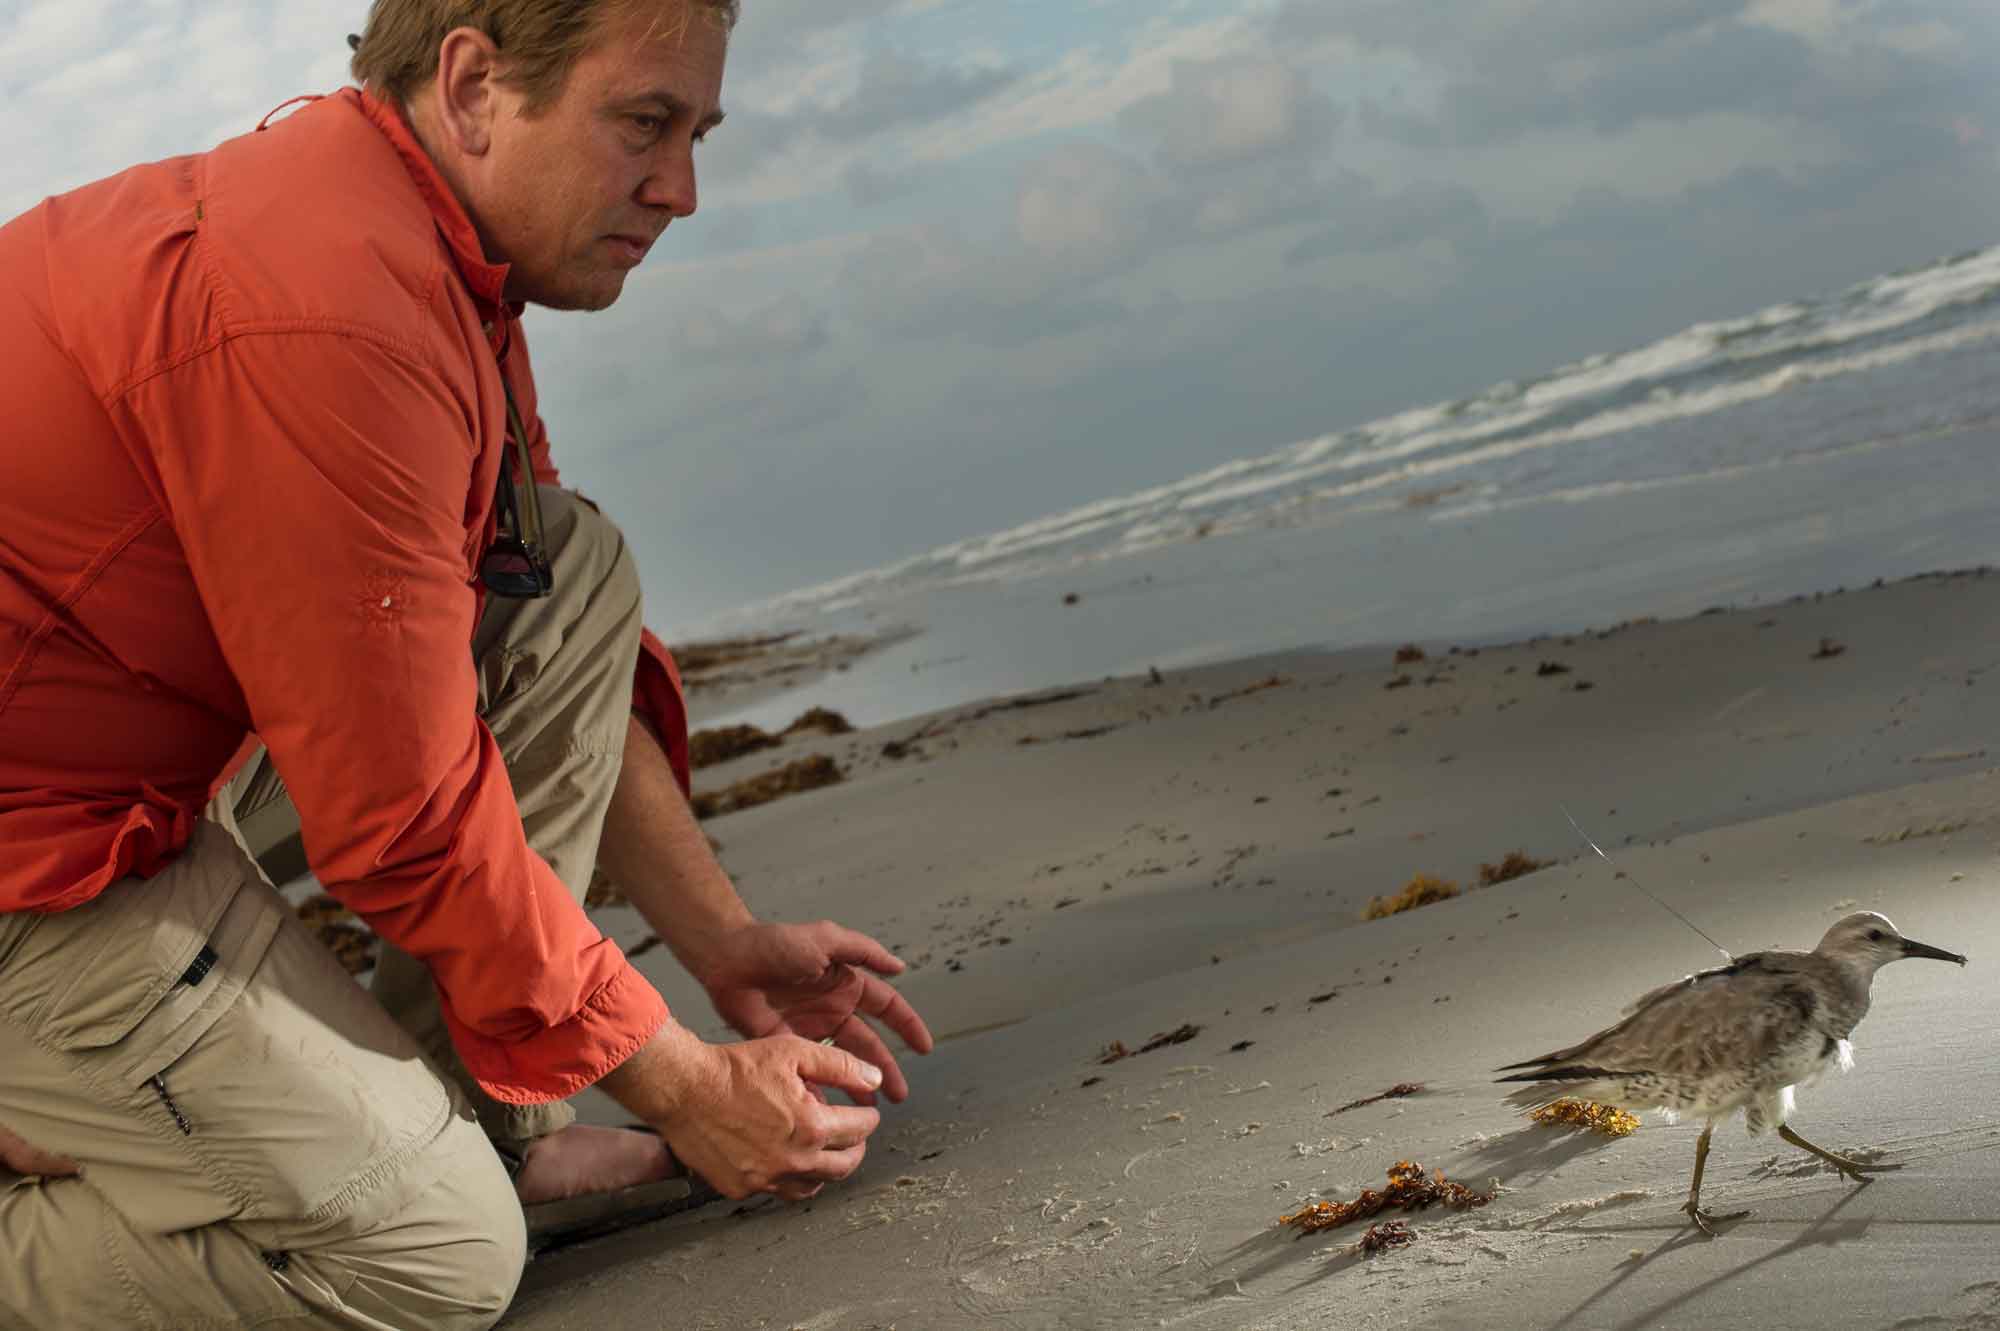 Peter Marra, '85, on shoreline releasing bird with tracking device back to the wild.